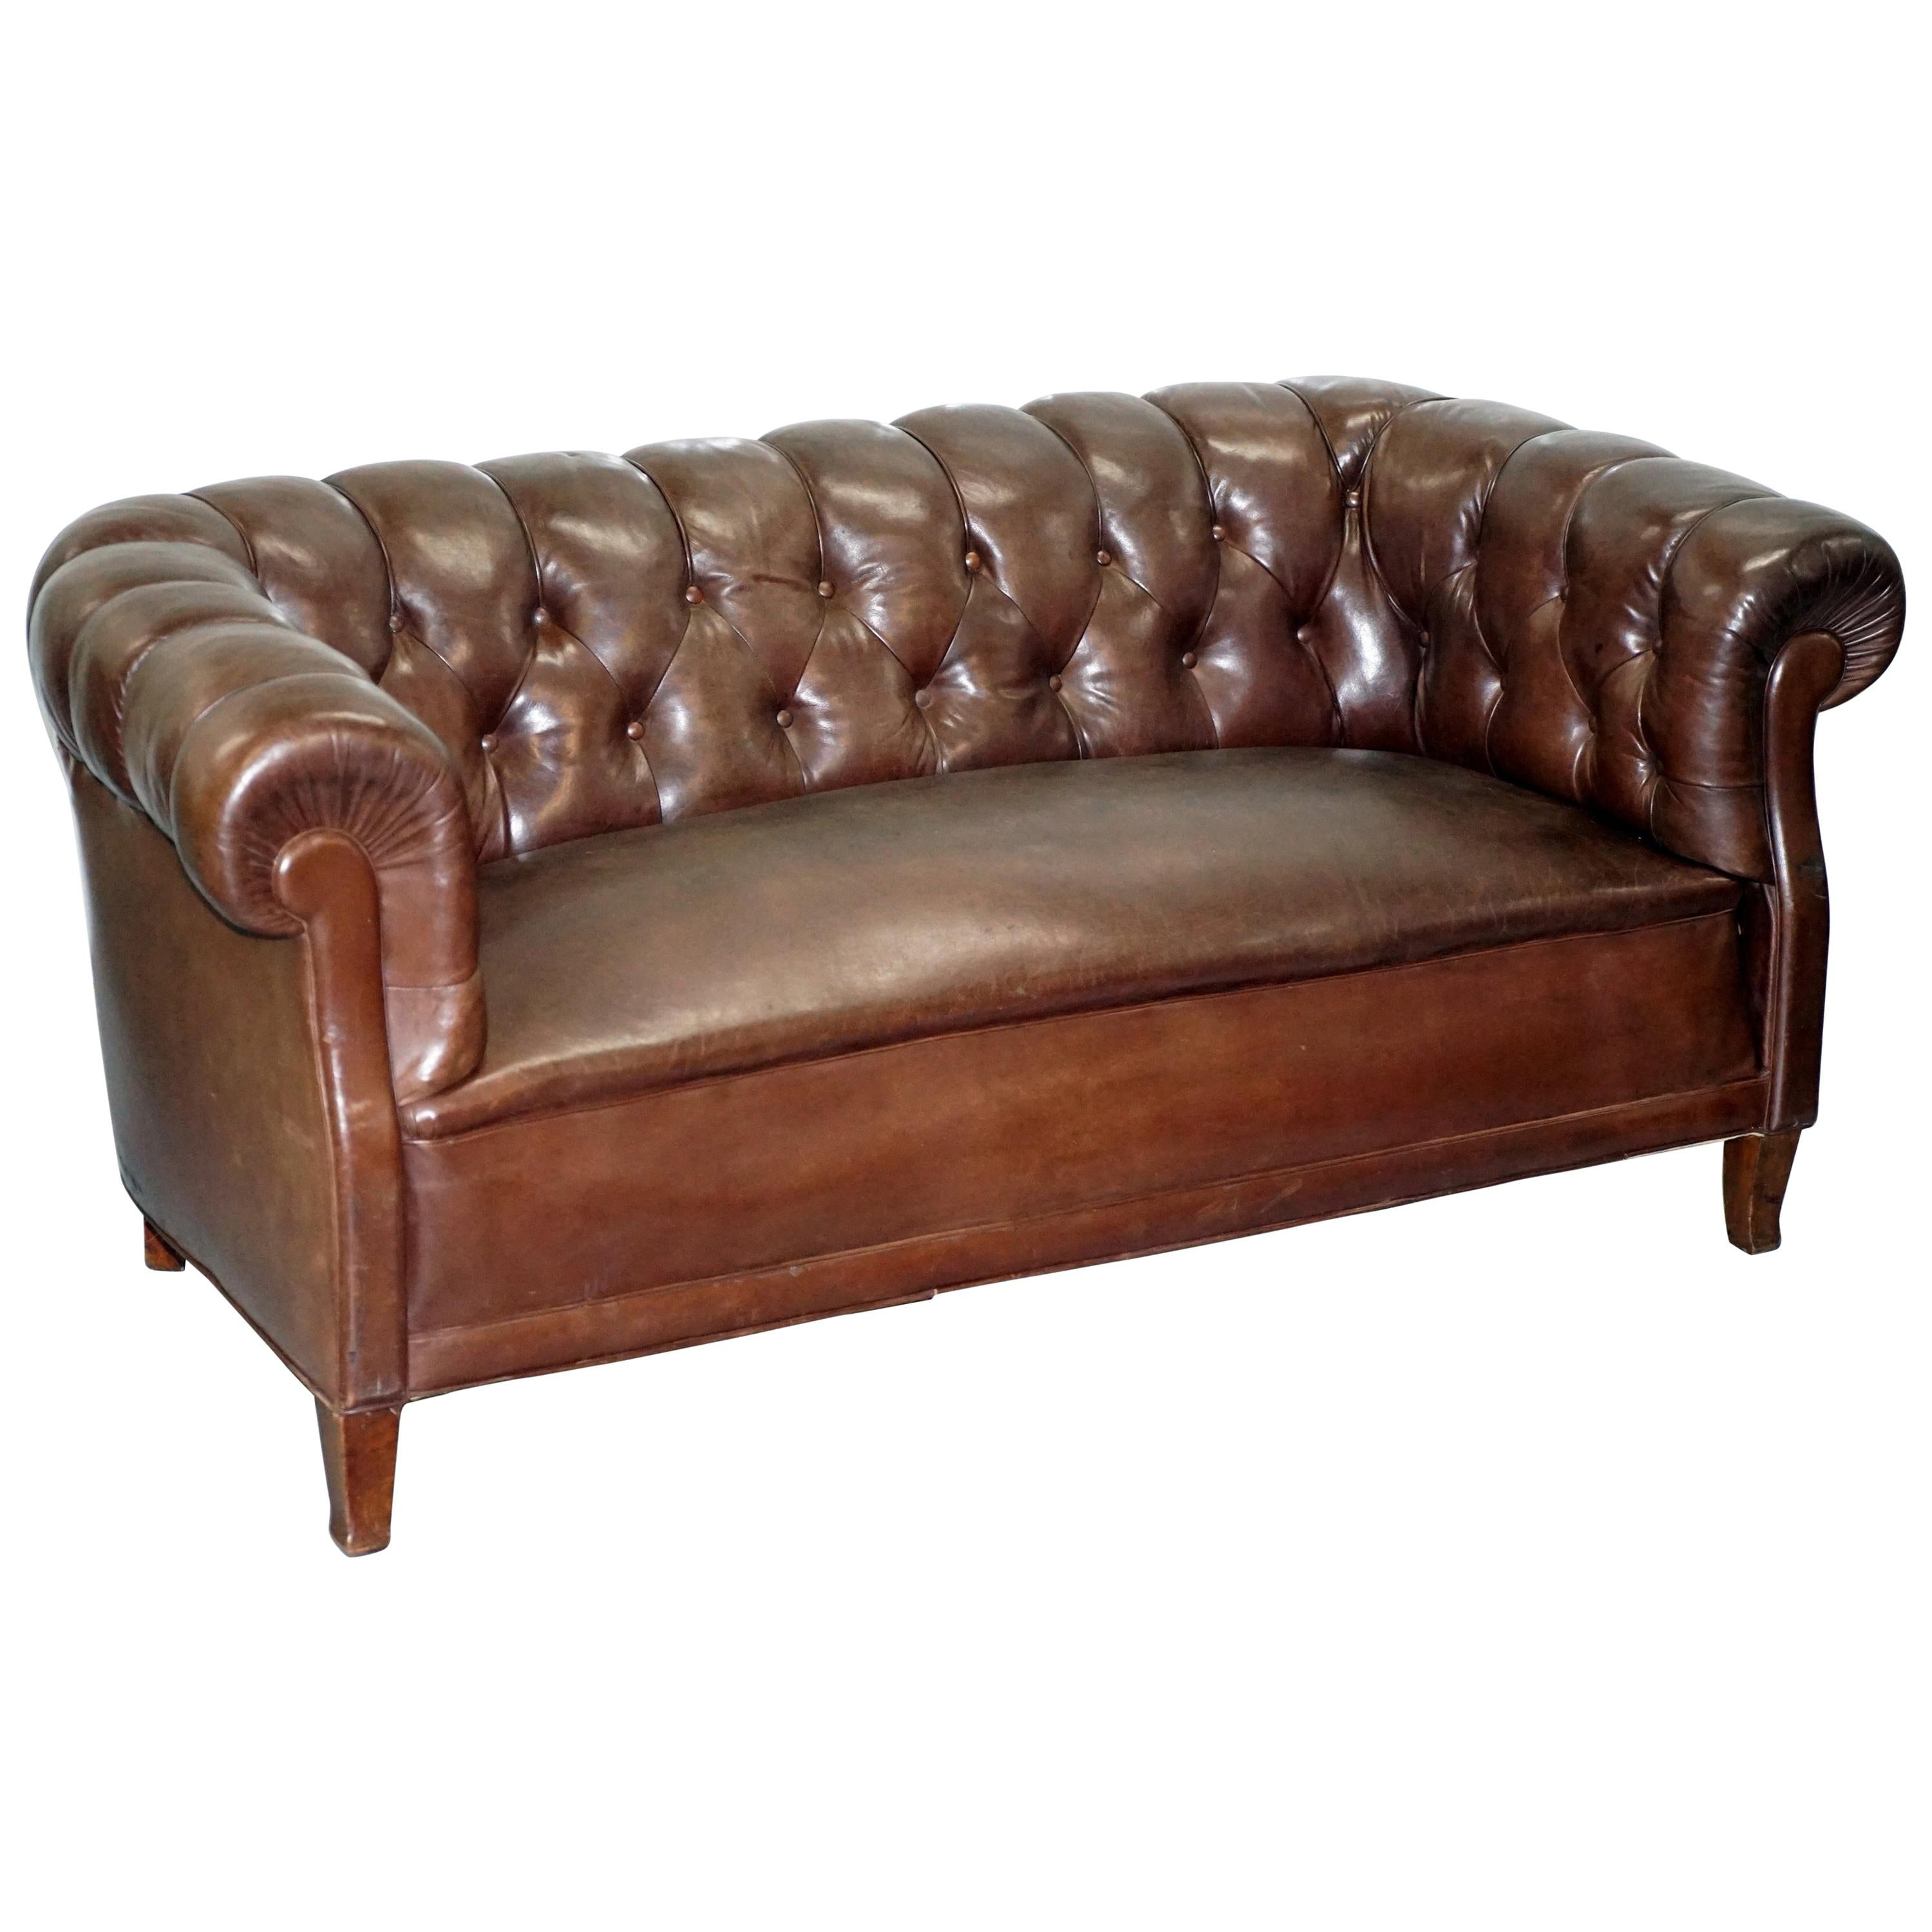 Original Victorian 1890 Swedish Aged Brown Leather Chesterfield Full Sprung Sofa